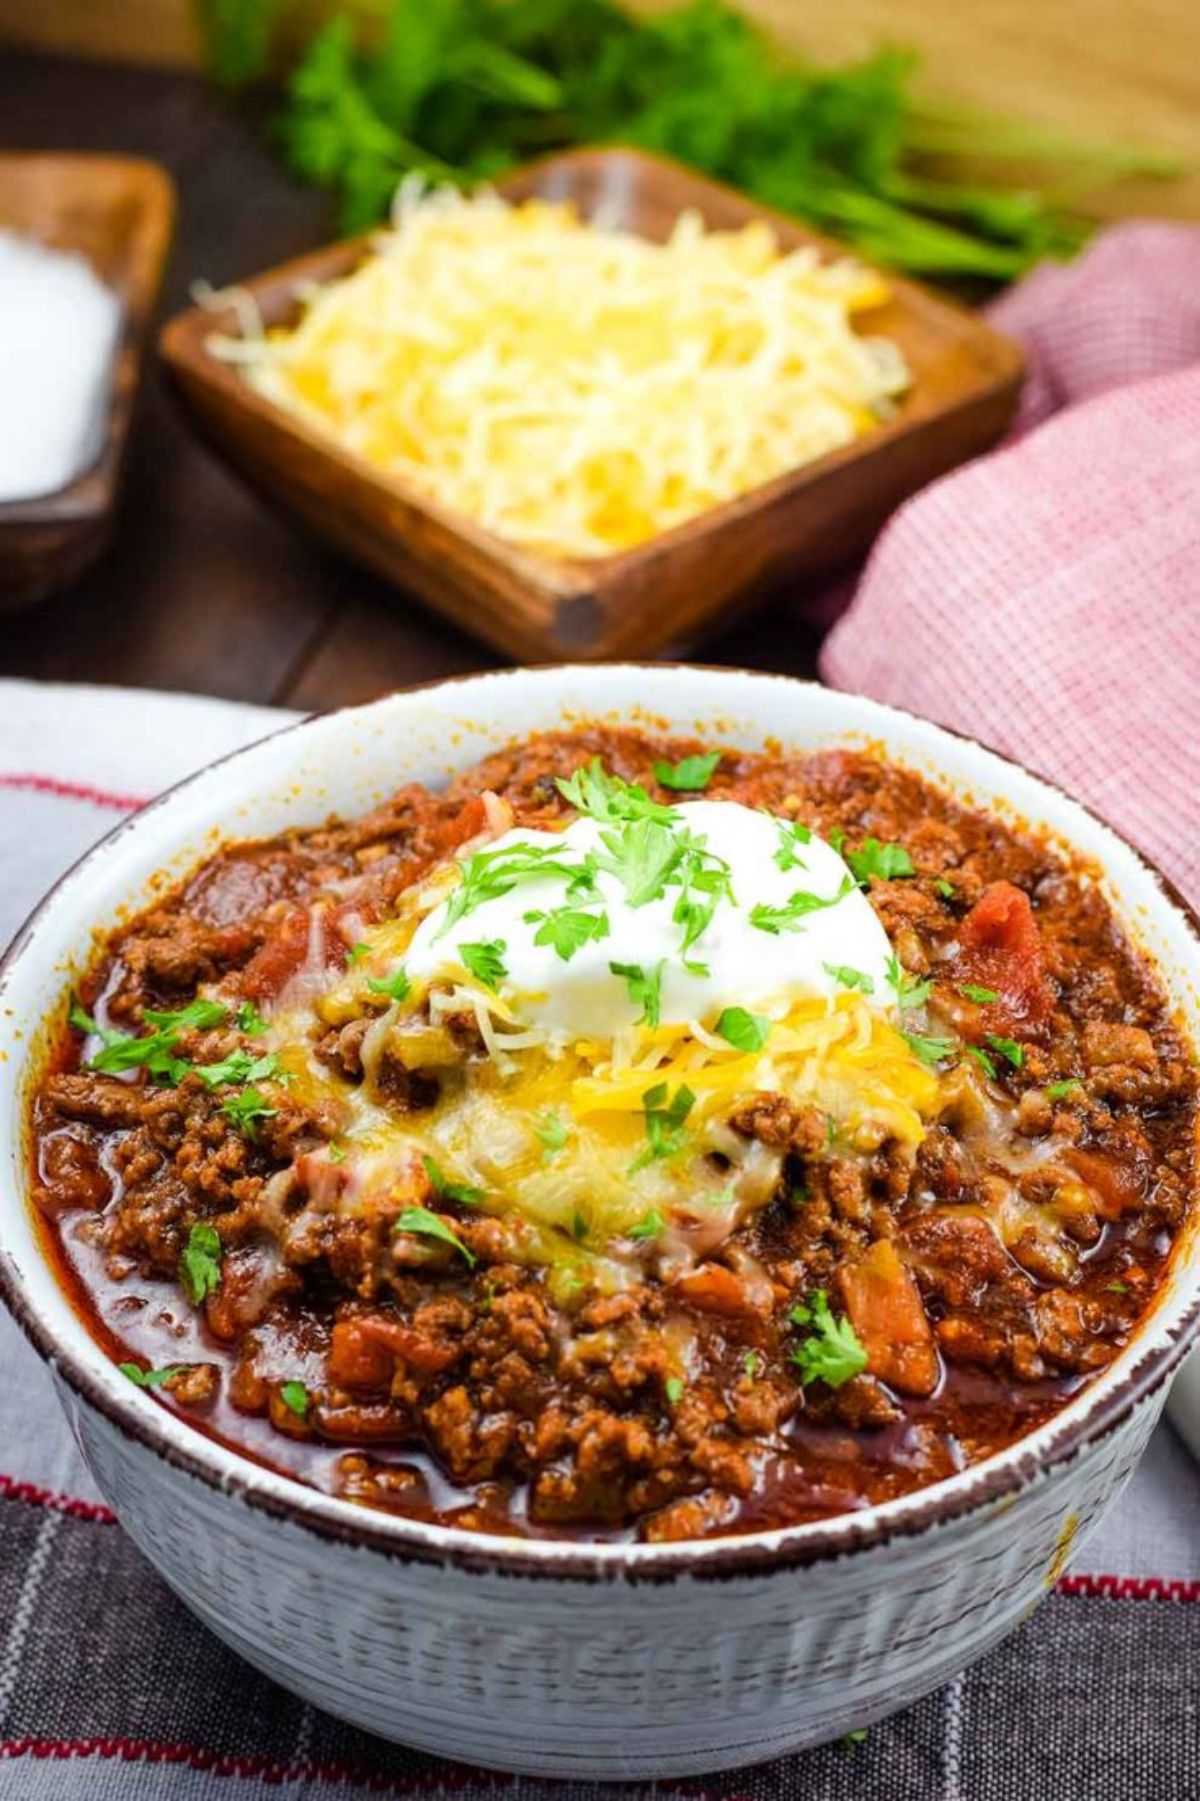 On a dark wooden table is a checked cloth. Blurred in the background is a square wooden bowl full of grated cheese. In the foreground is a round deep bowl filled with chilli, topped with sour cream, cheese and chopped parsley